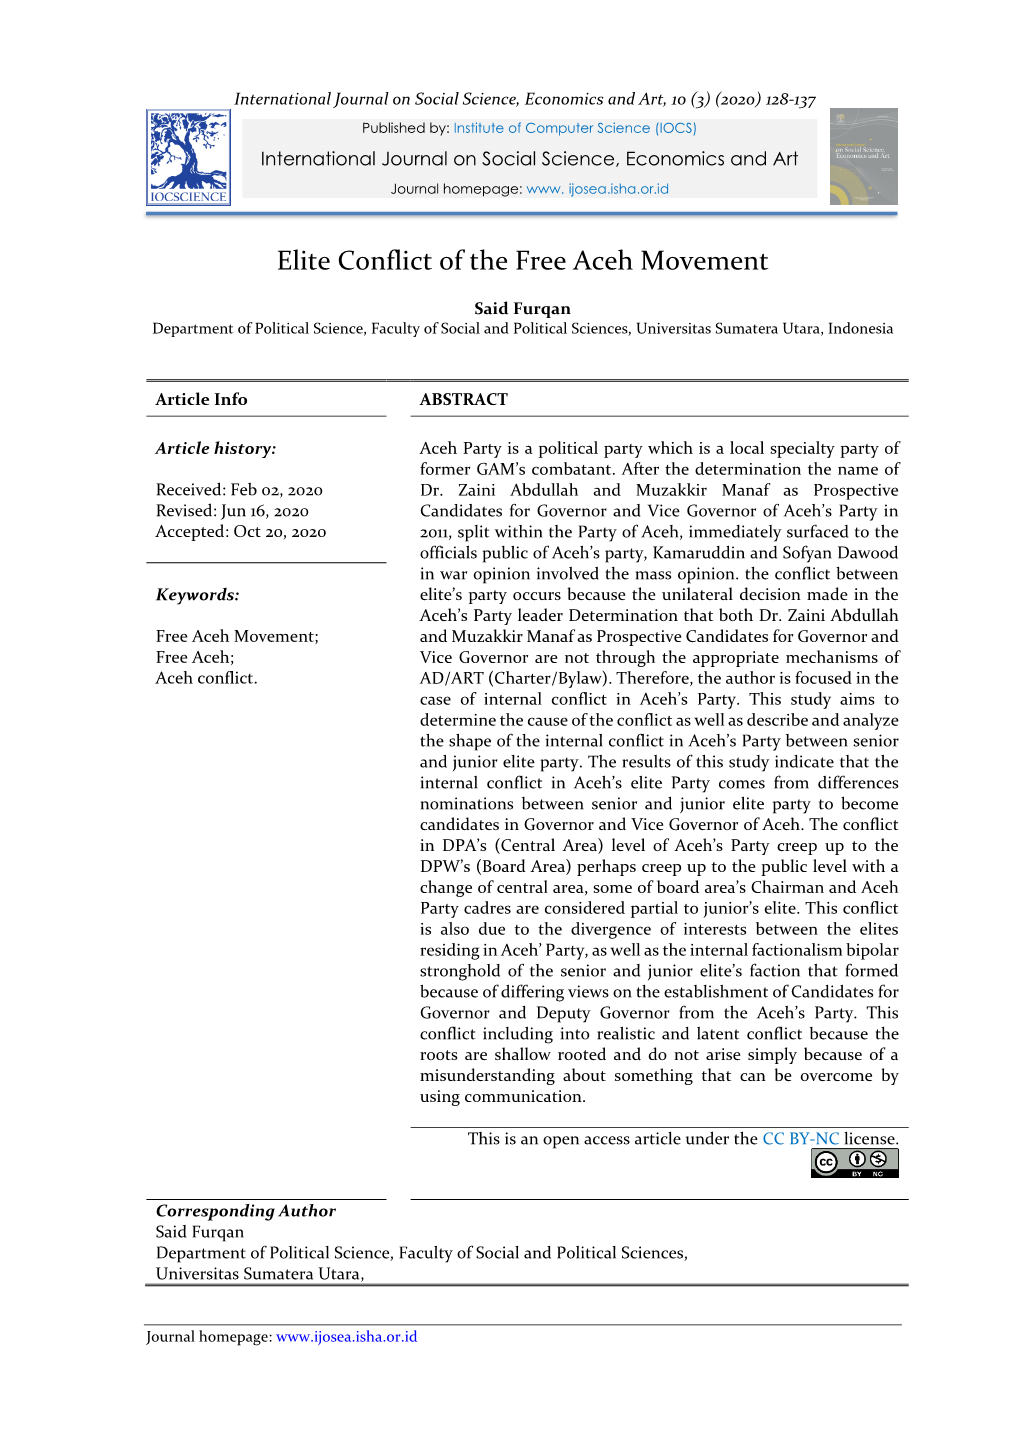 Elite Conflict of the Free Aceh Movement